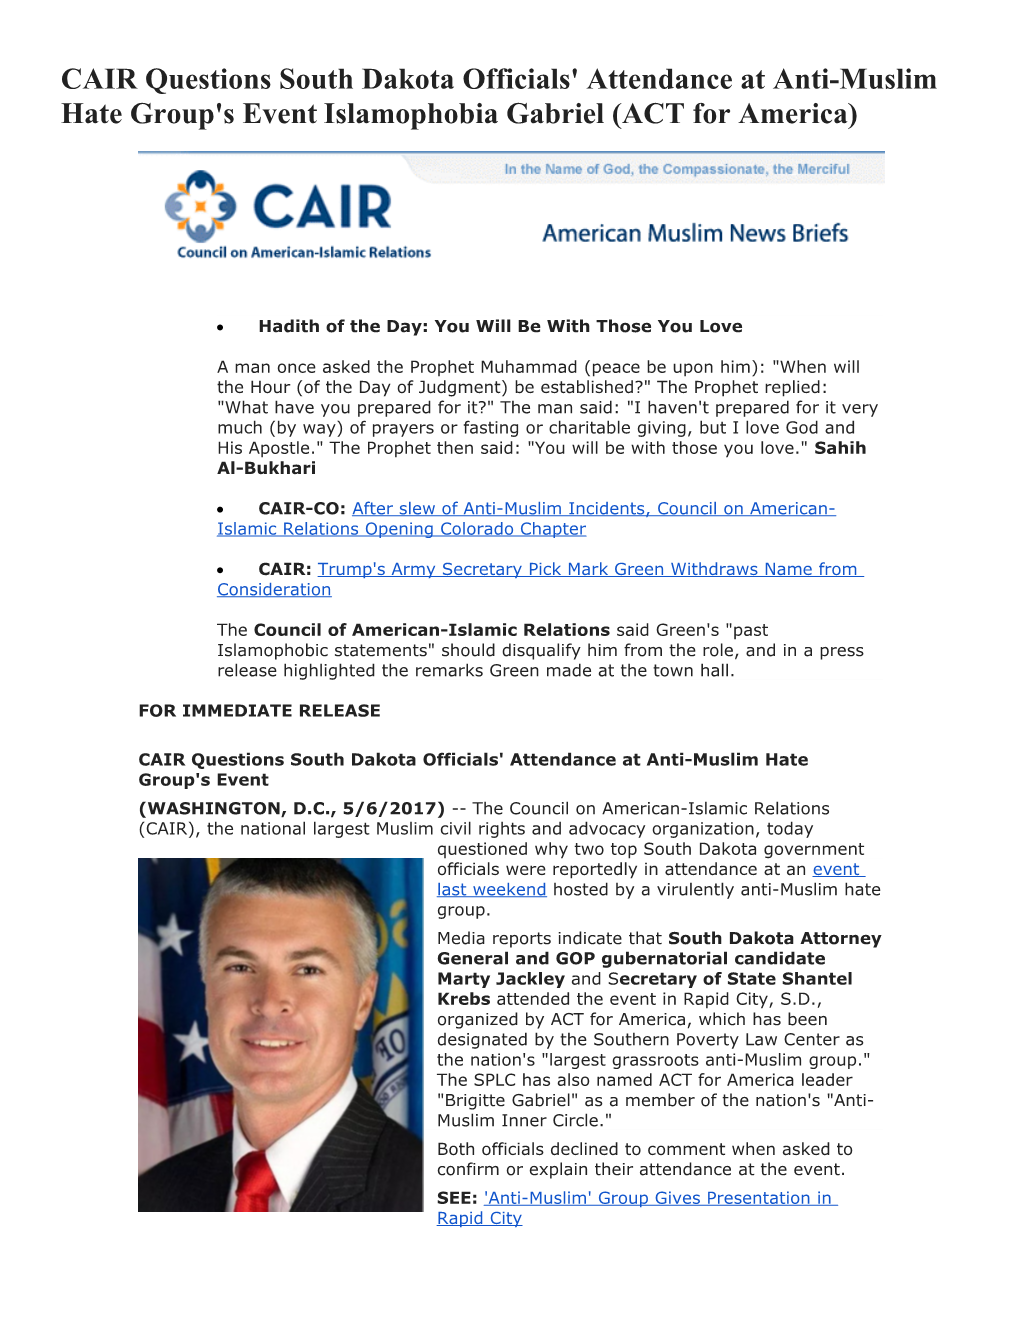 CAIR Questions South Dakota Officials' Attendance at Anti-Muslim Hate Group's Event